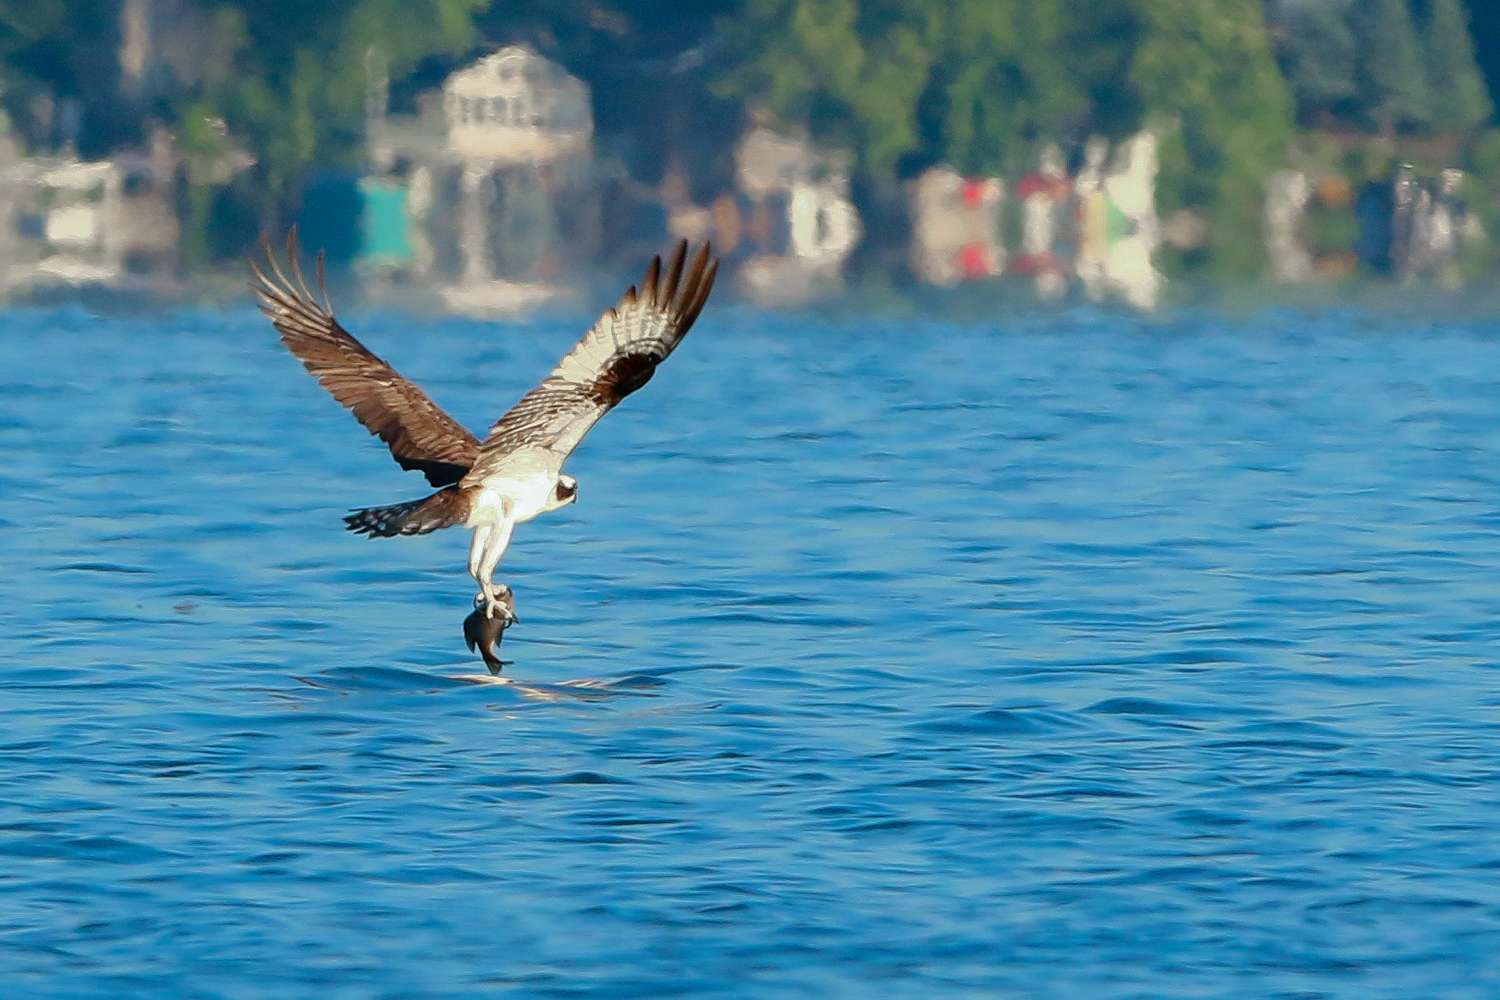 Up to the northeast at the 2019 Cayuga Bassmaster Elite, another osprey catching lunch. 